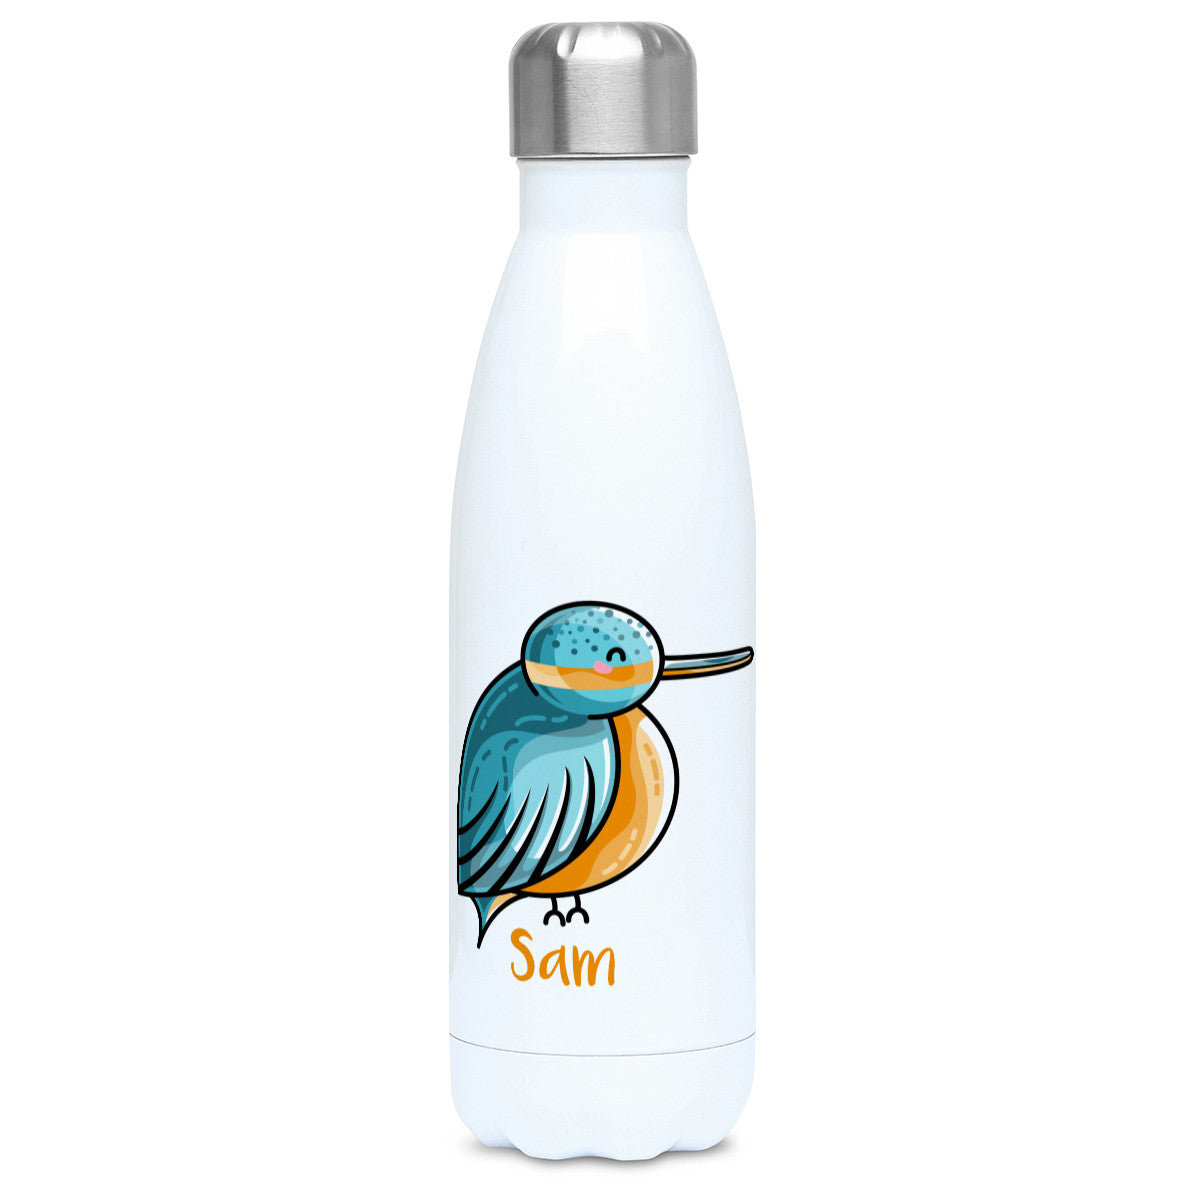 cute turquoise and orange kingfisher design personalised with a name on a white metal insulated drinks bottle, lid on